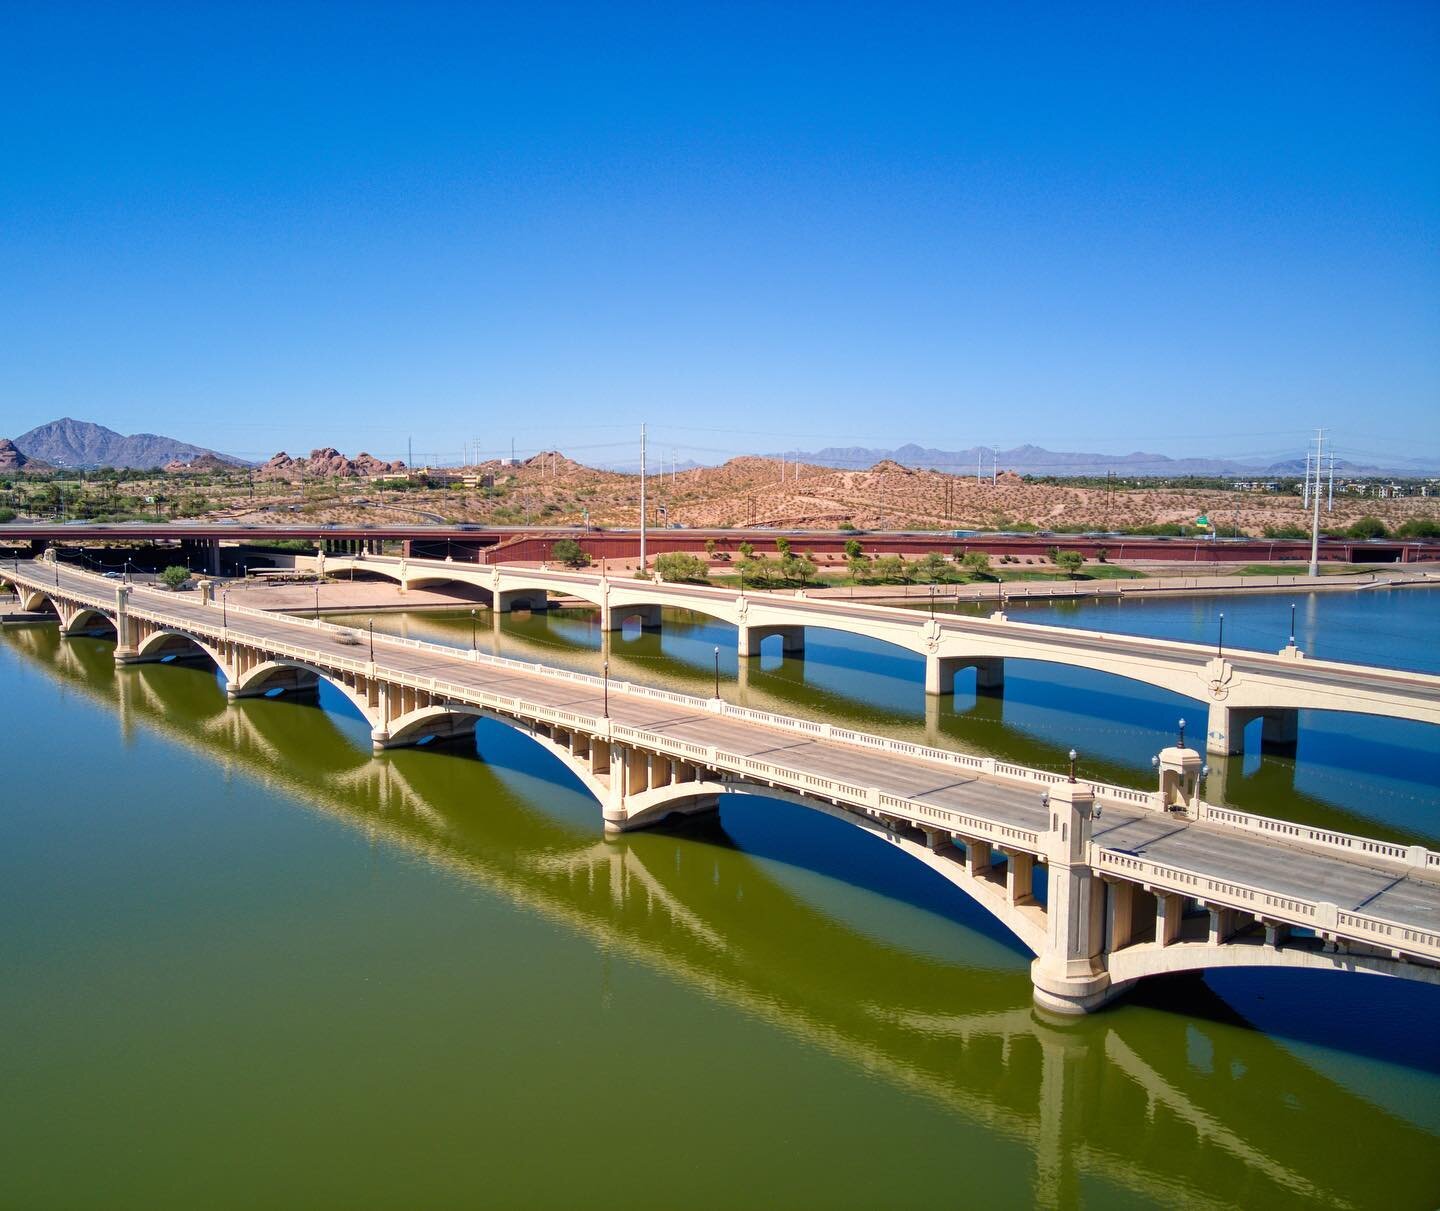 The Mill Avenue Bridge in Tempe is the second oldest vehicle crossing on the Salt River and is considered one of the oldest crossings in the Phoenix area. It was originally named the &lsquo;Tempe Bridge&rsquo; before it was renamed the Mill Avenue Br